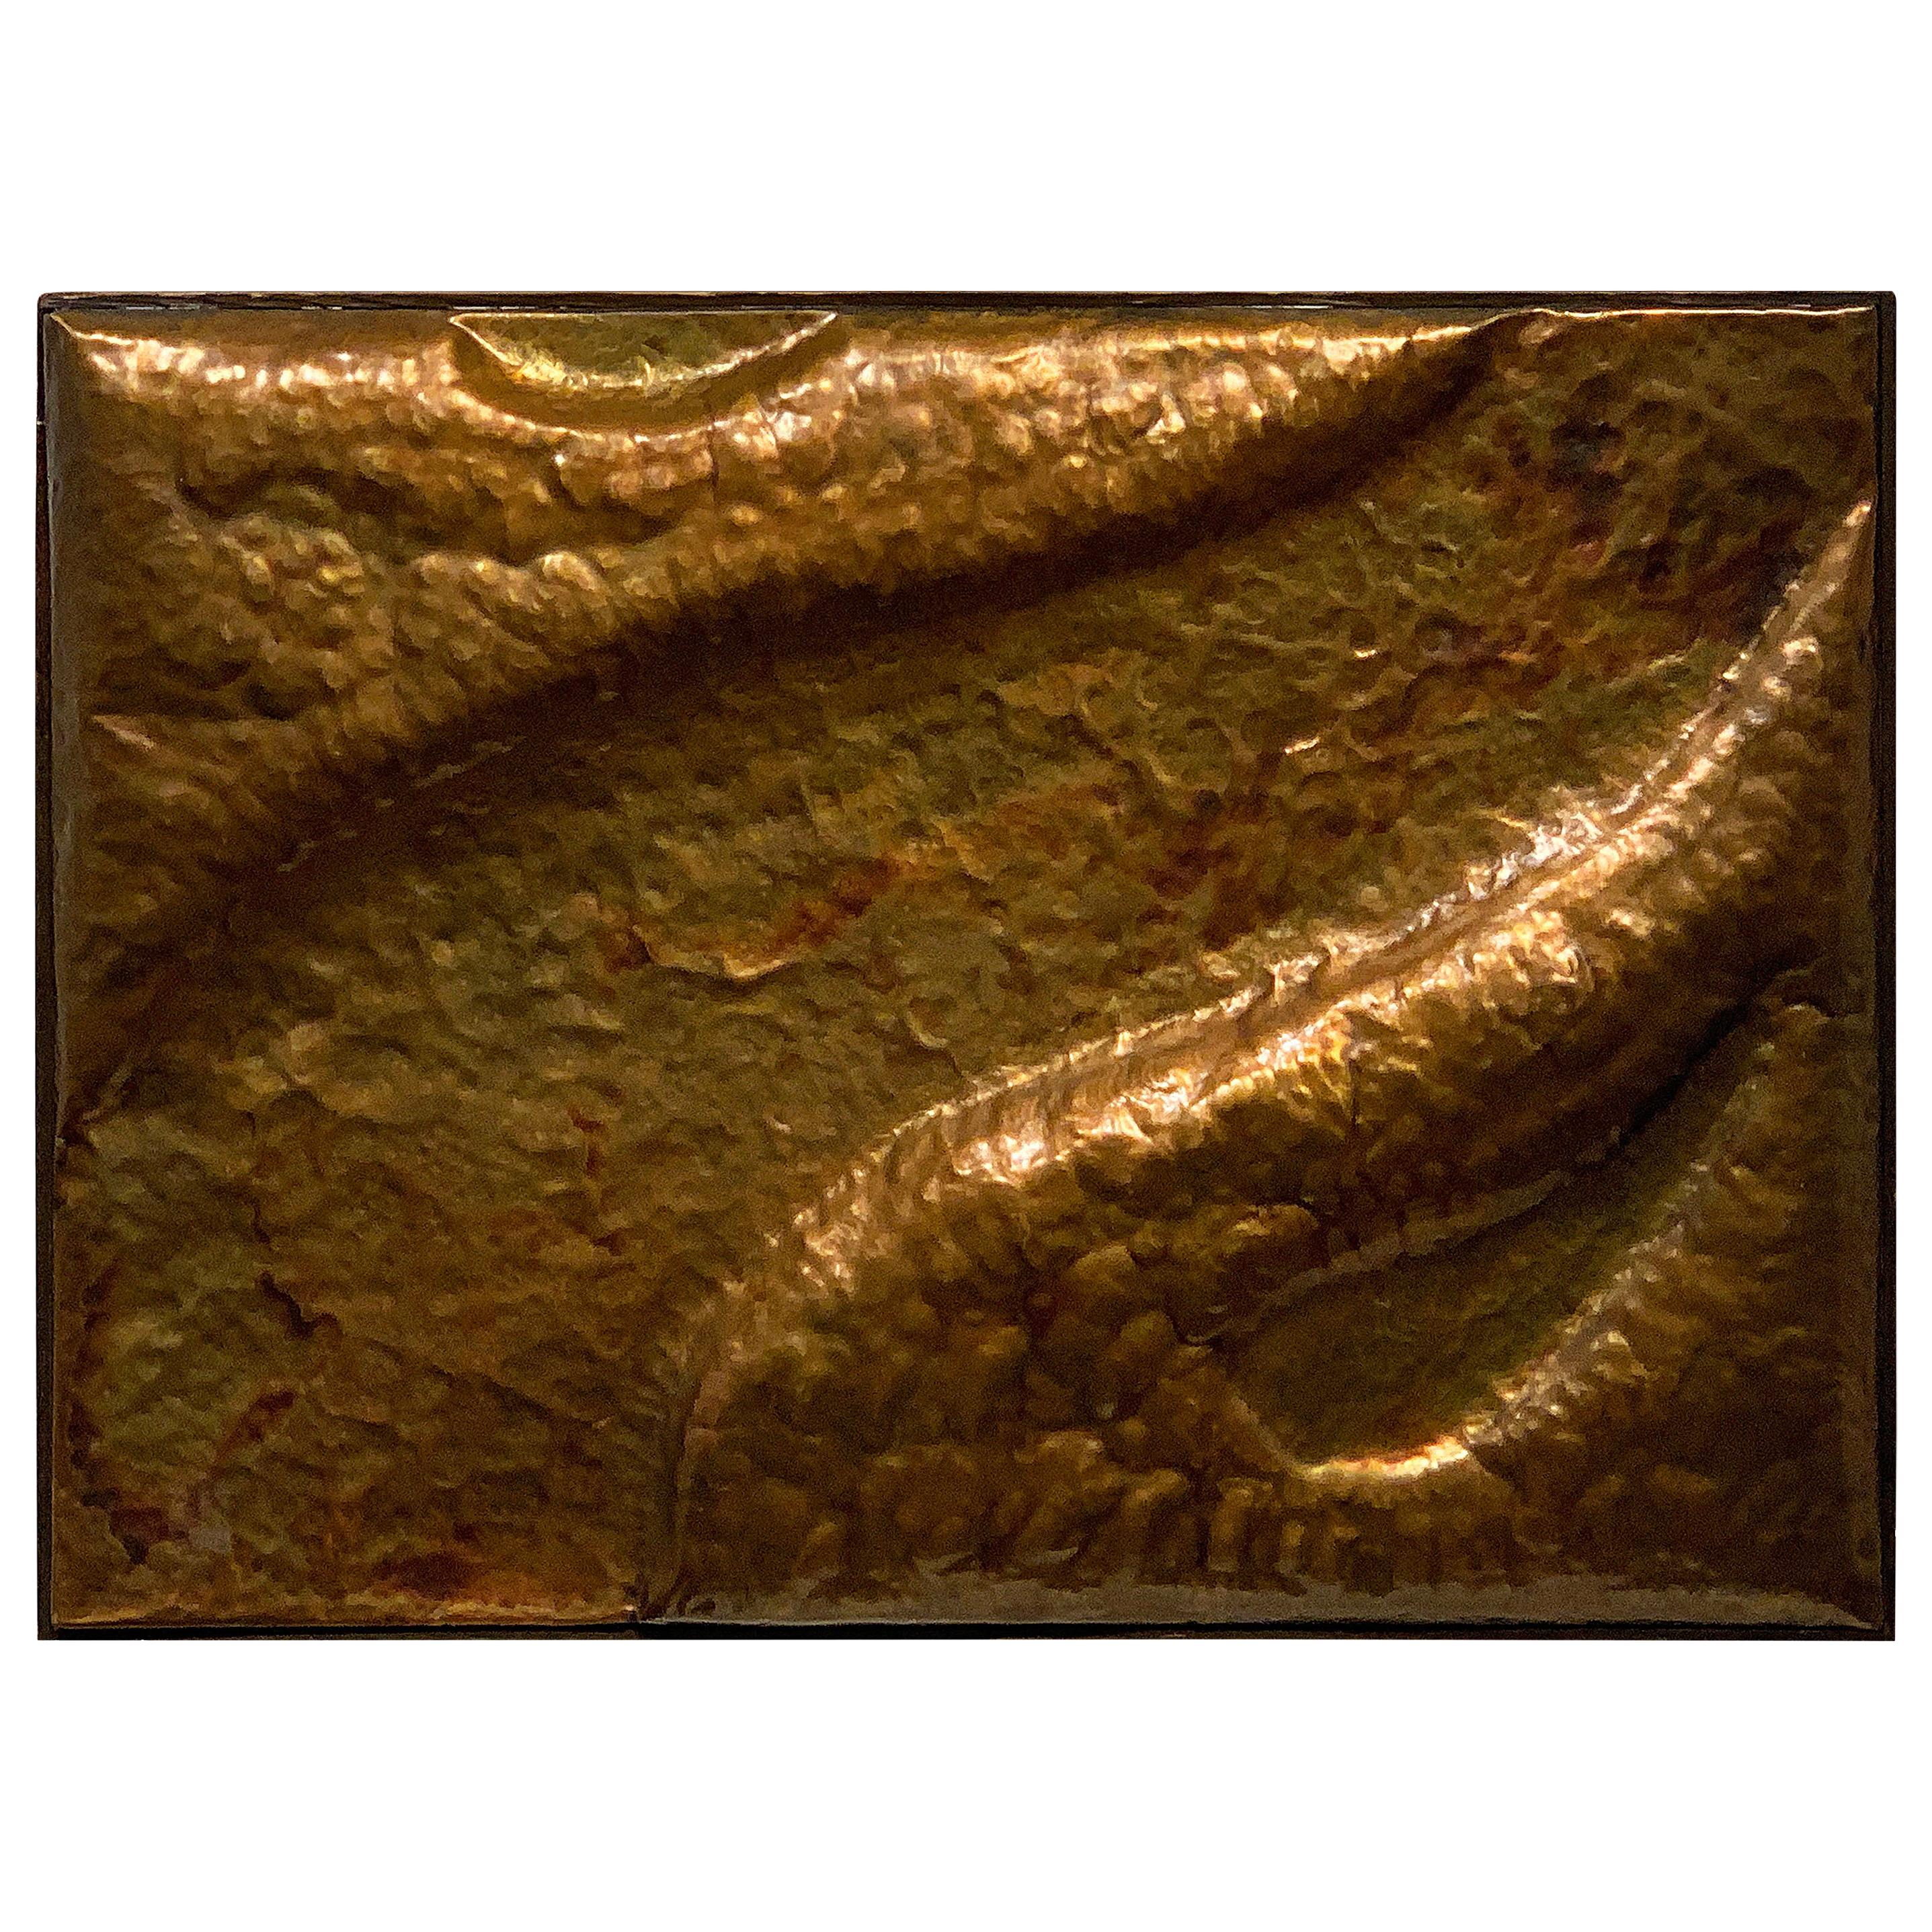 Hammered Copper Wall Relief by W.R.E. 1969